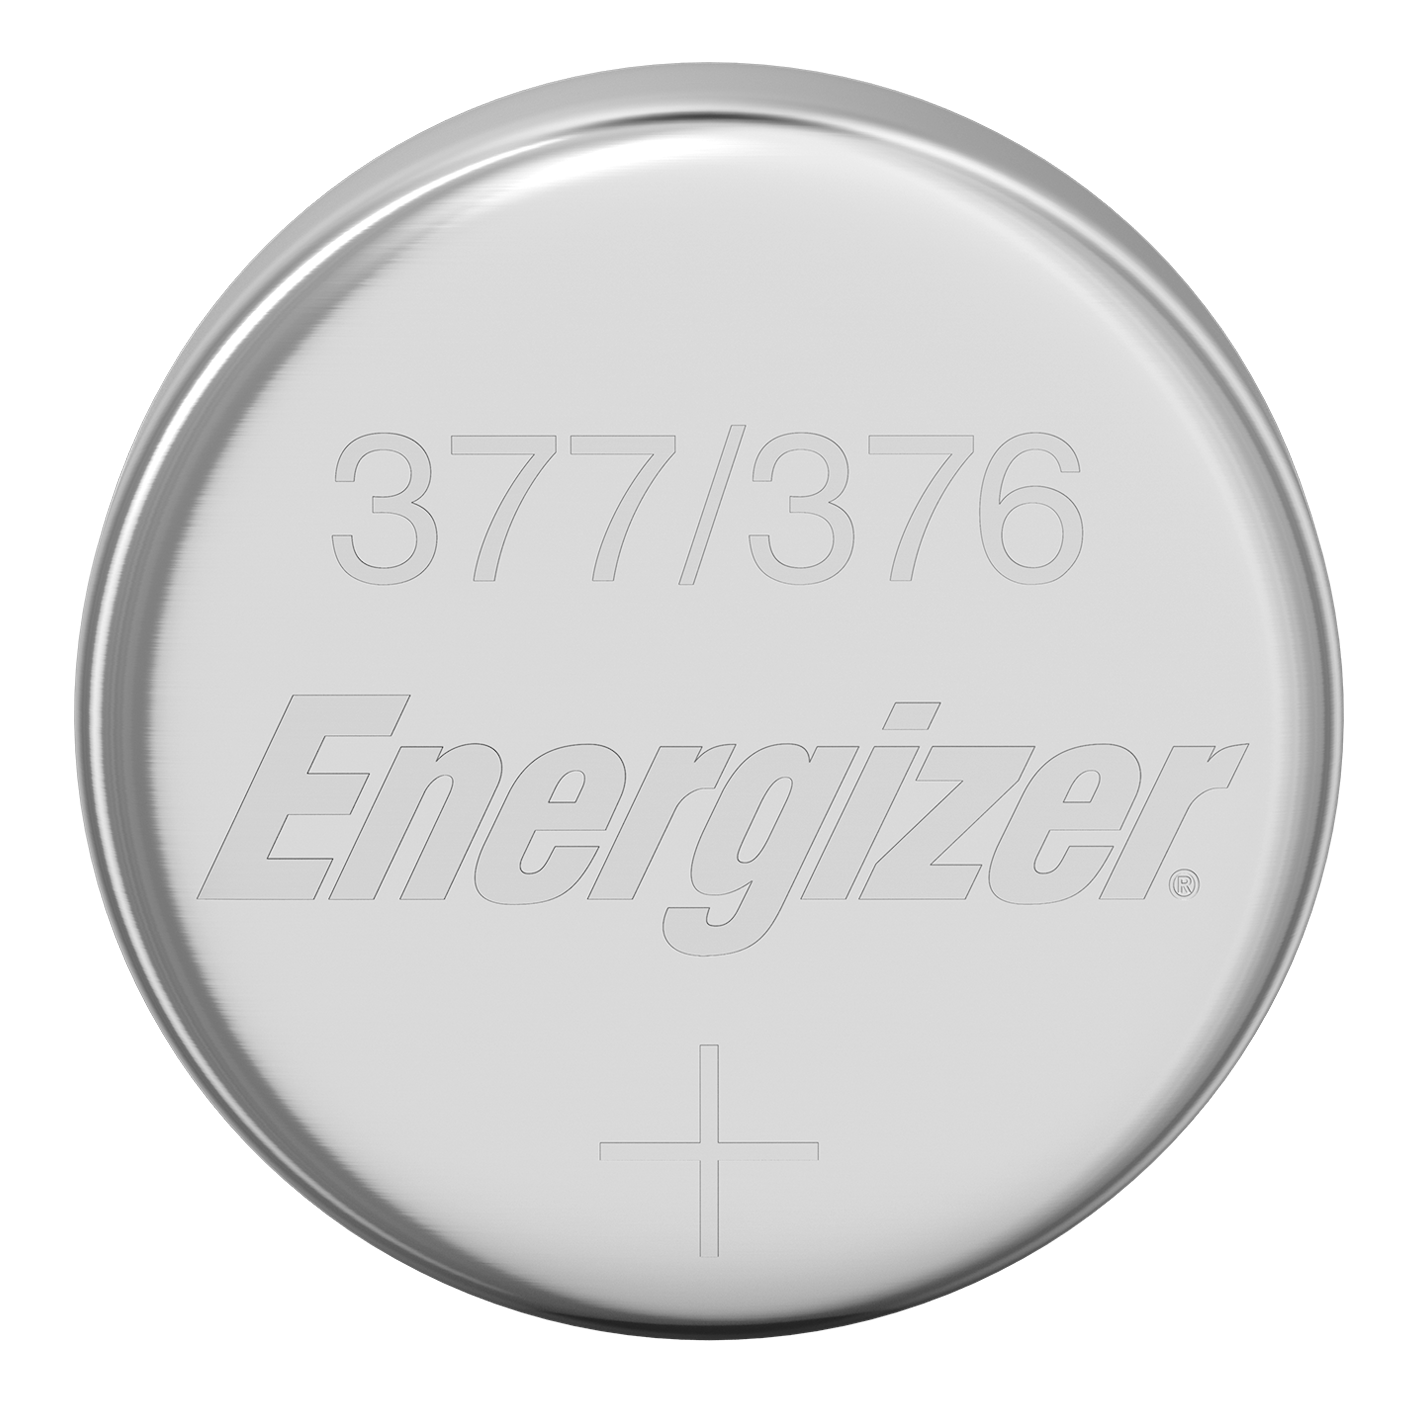 Energizer 377/376 Lithium Coin Cell, Pack of 1